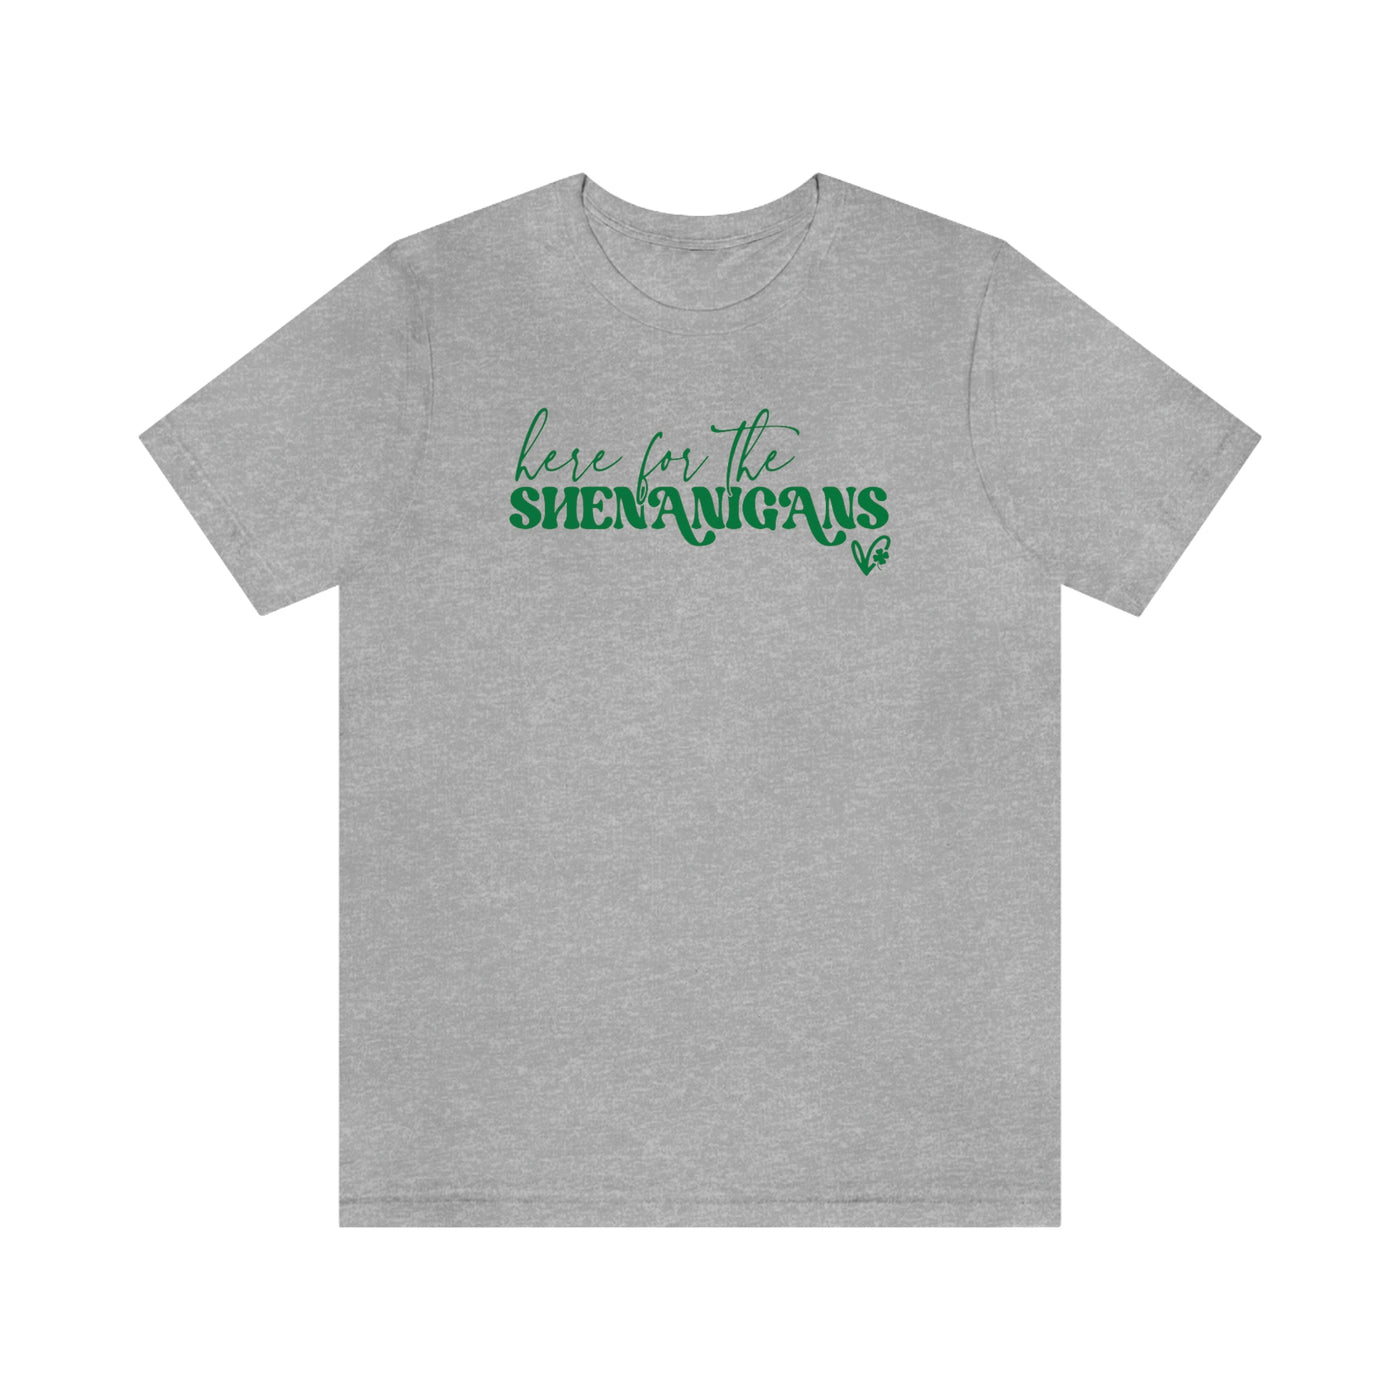 Here for the Shenanigans Tee